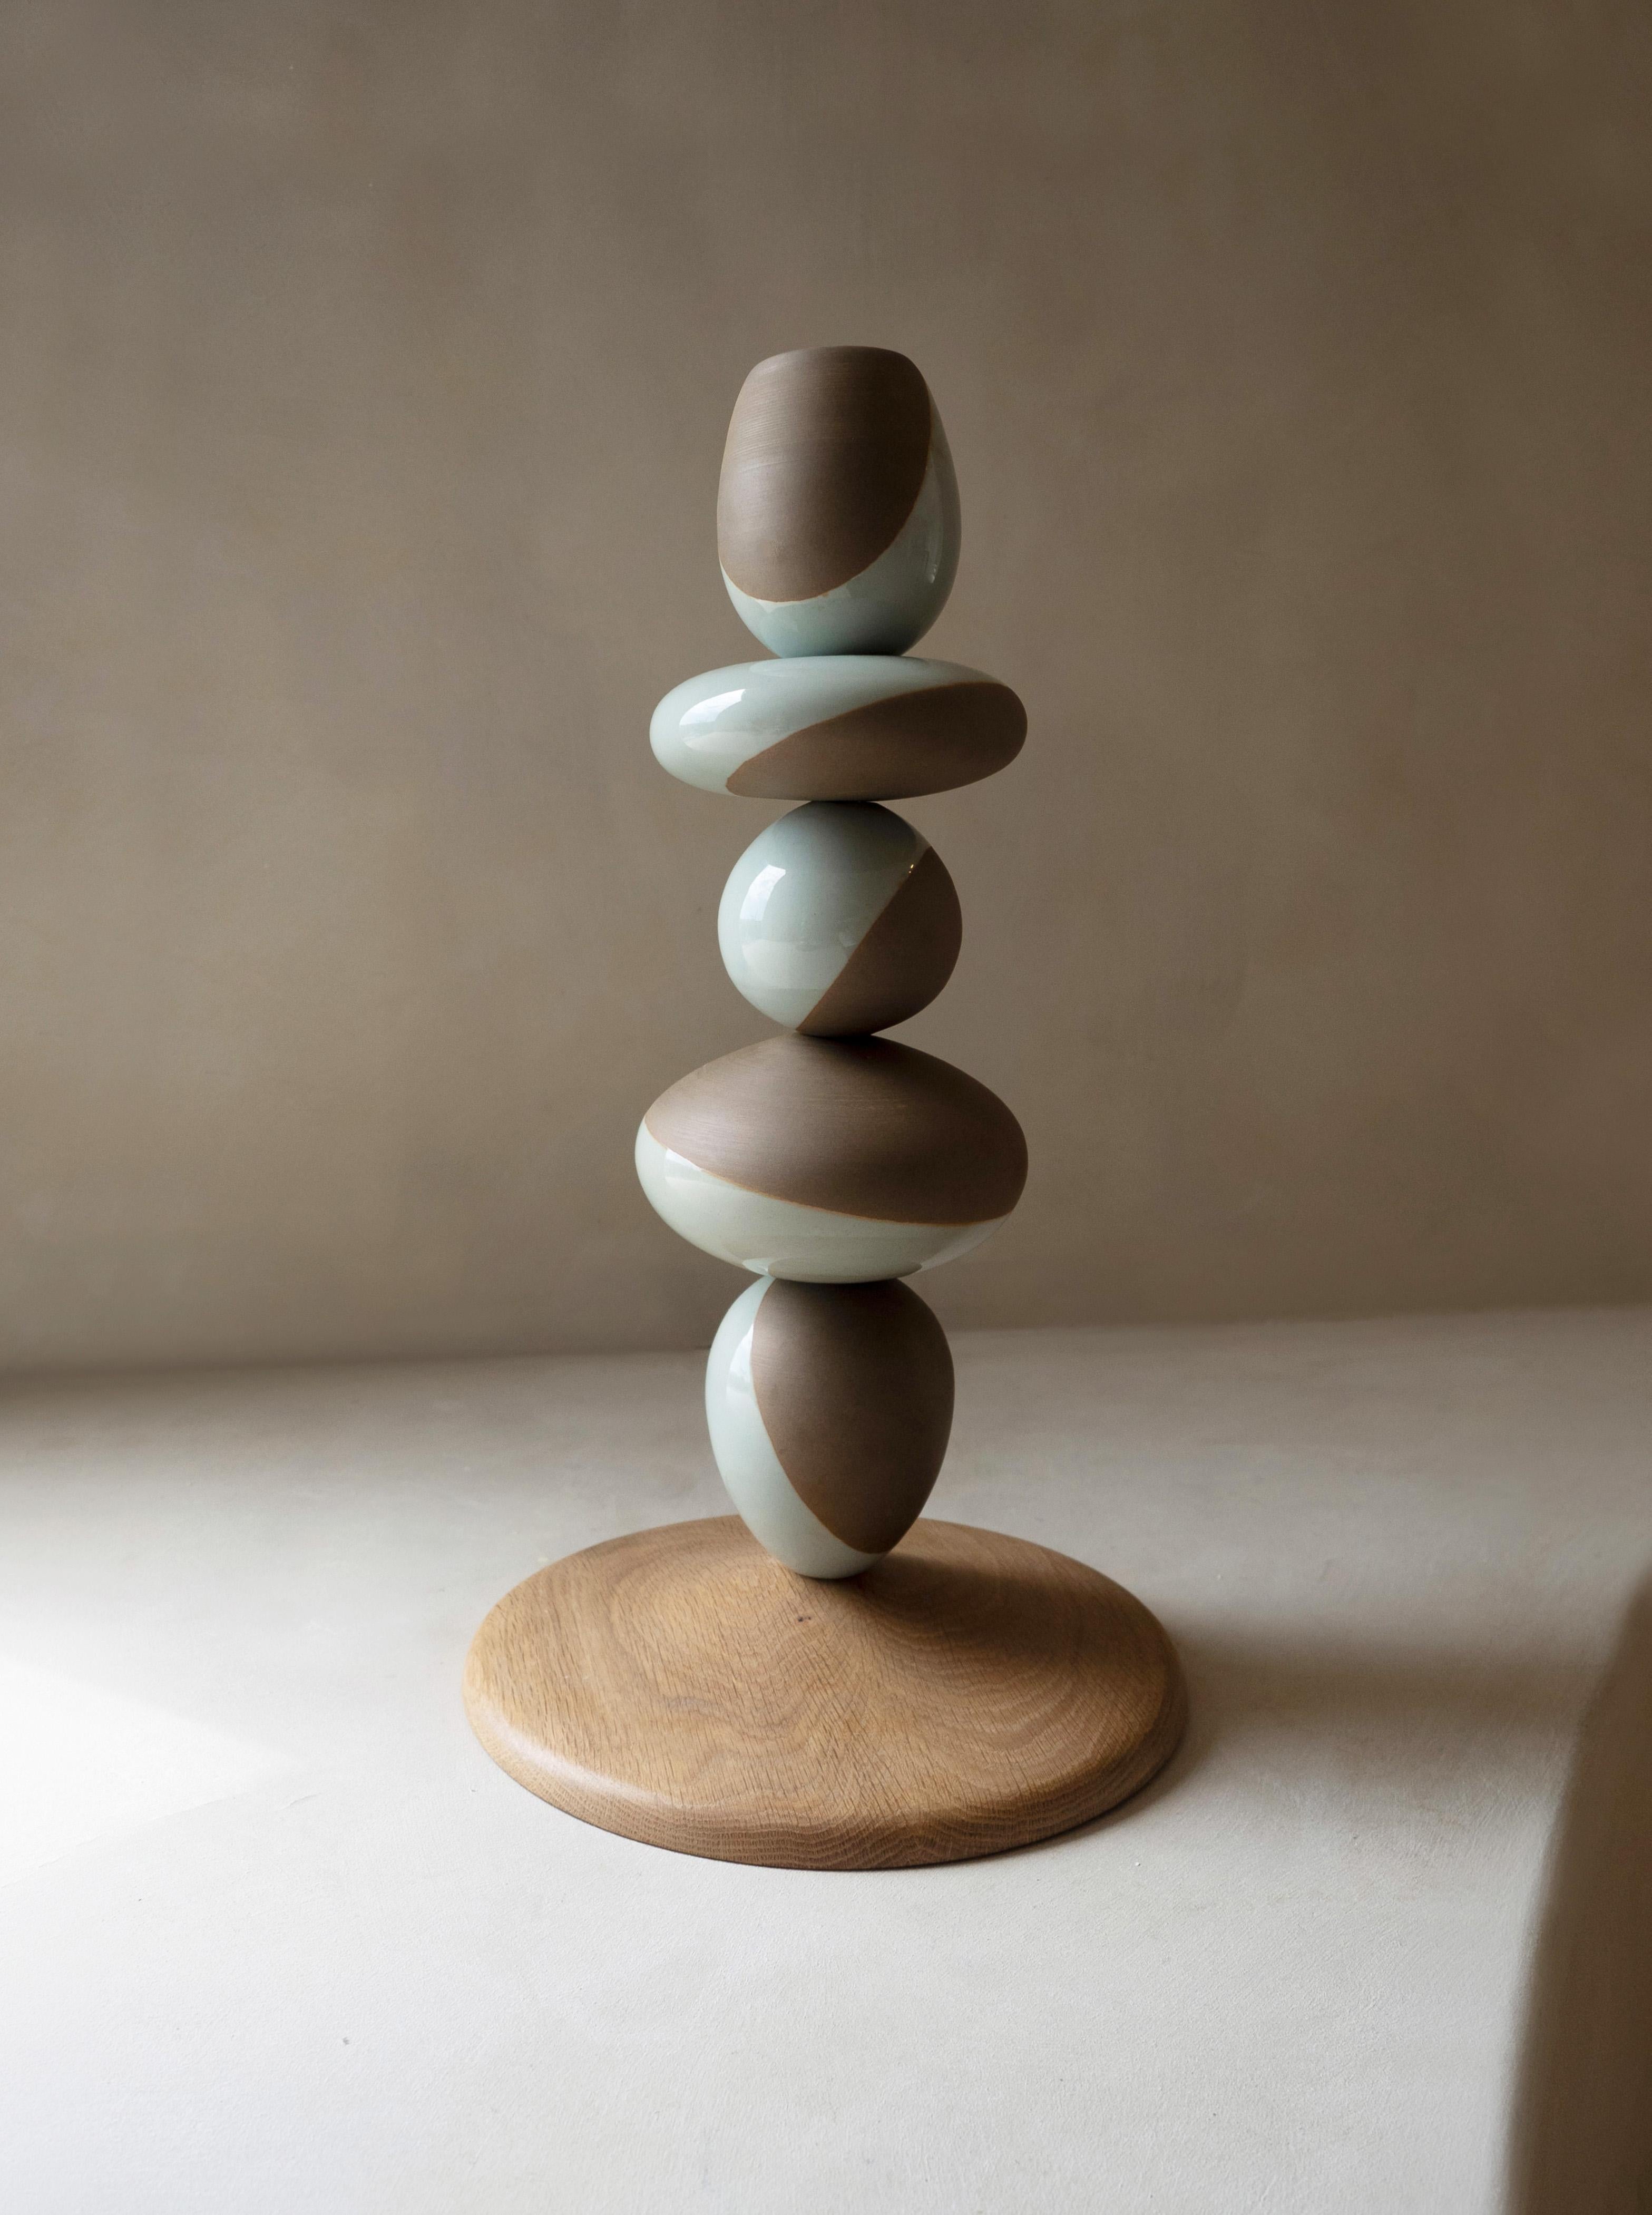 Stack Vessel II by Soo Joo is a stack sculpture made in Korean Ceramic. It is a timeless form, reminiscent of a stack of perfectly balanced river stones. This is the taller of the two sculpture pairs. The Stack Vessel series is created with